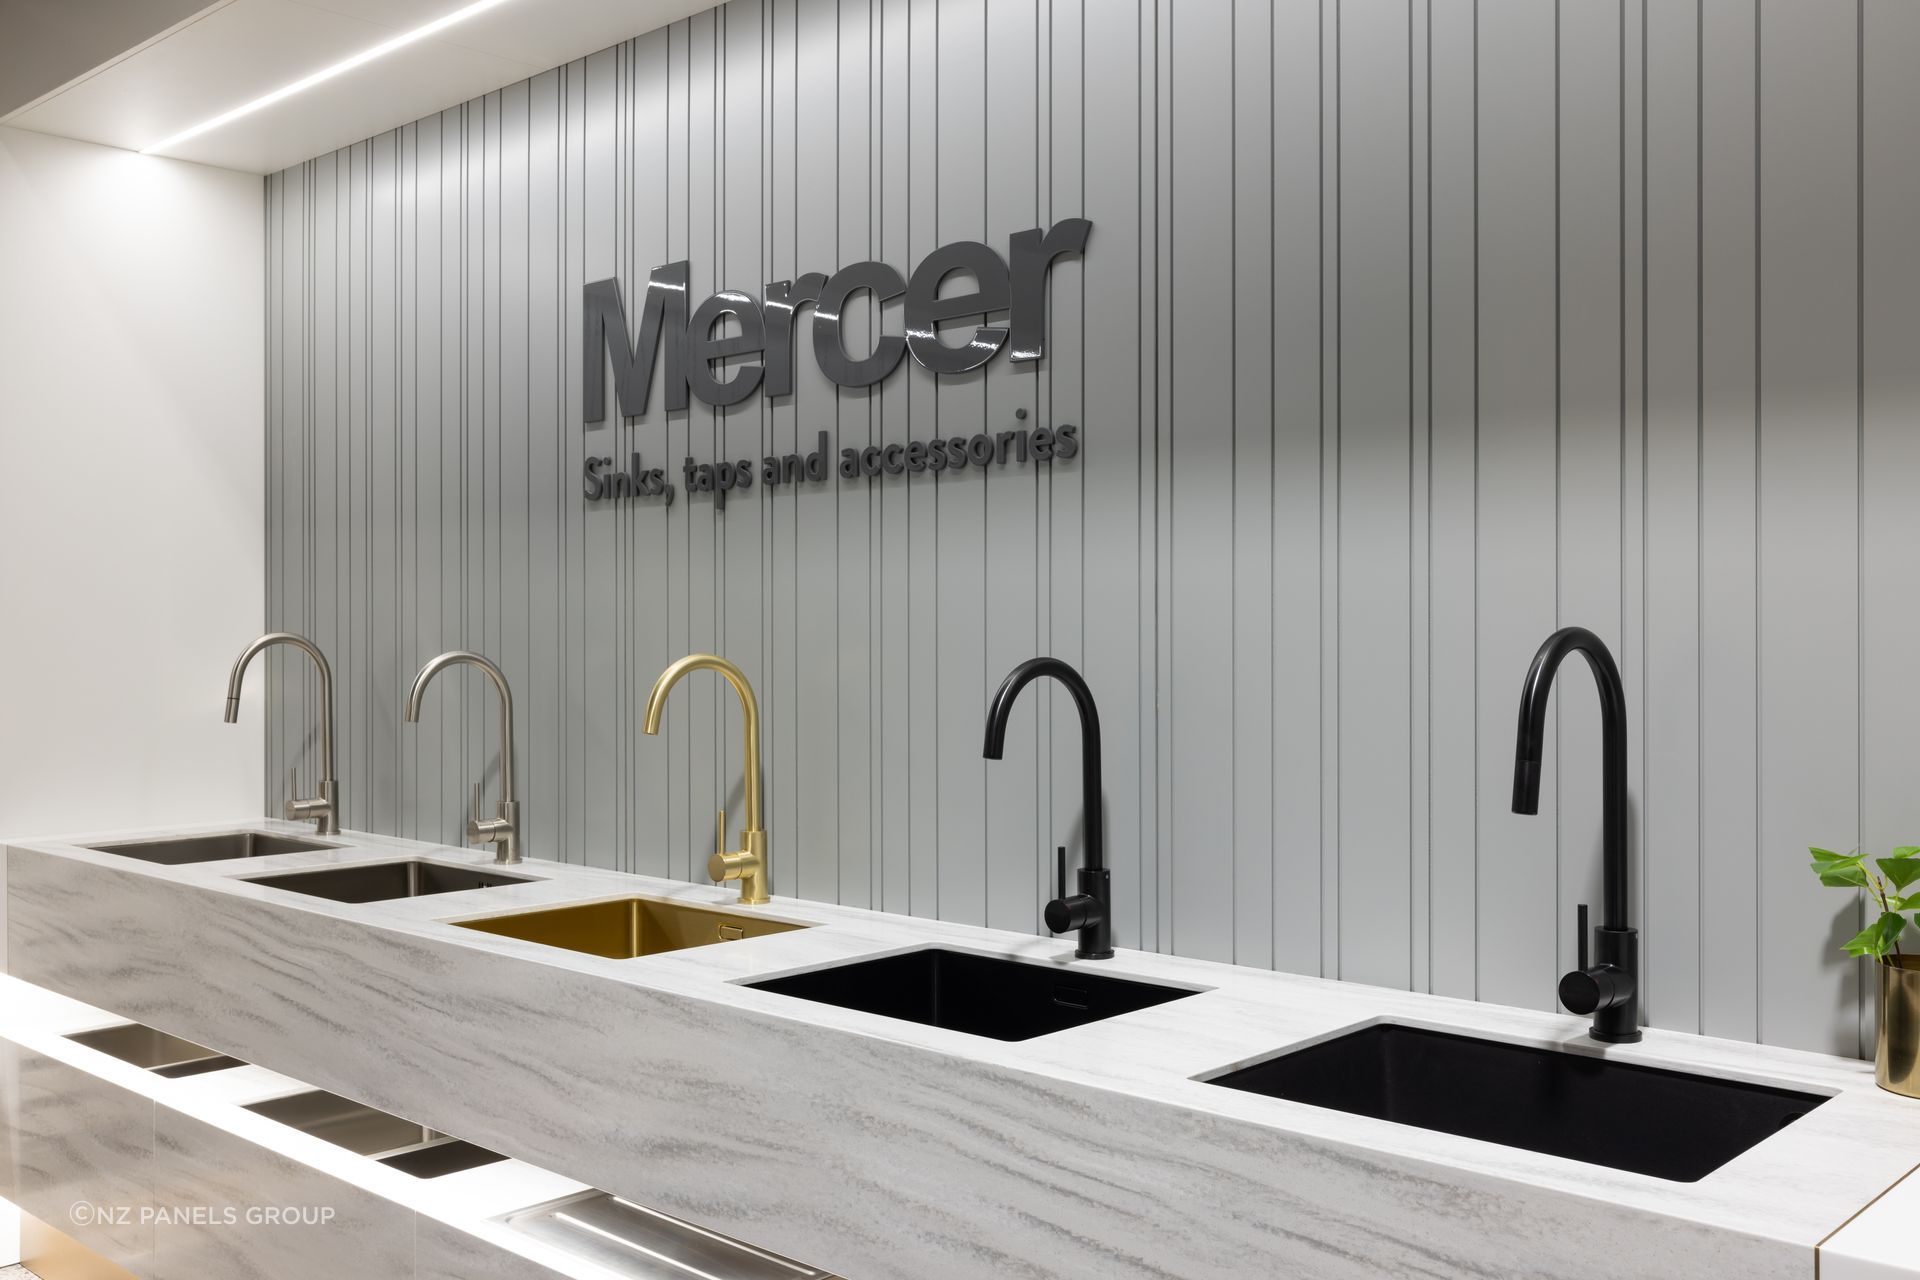 Mercer sinks, taps, and accessories are available in matching finishes for a cohesive look.